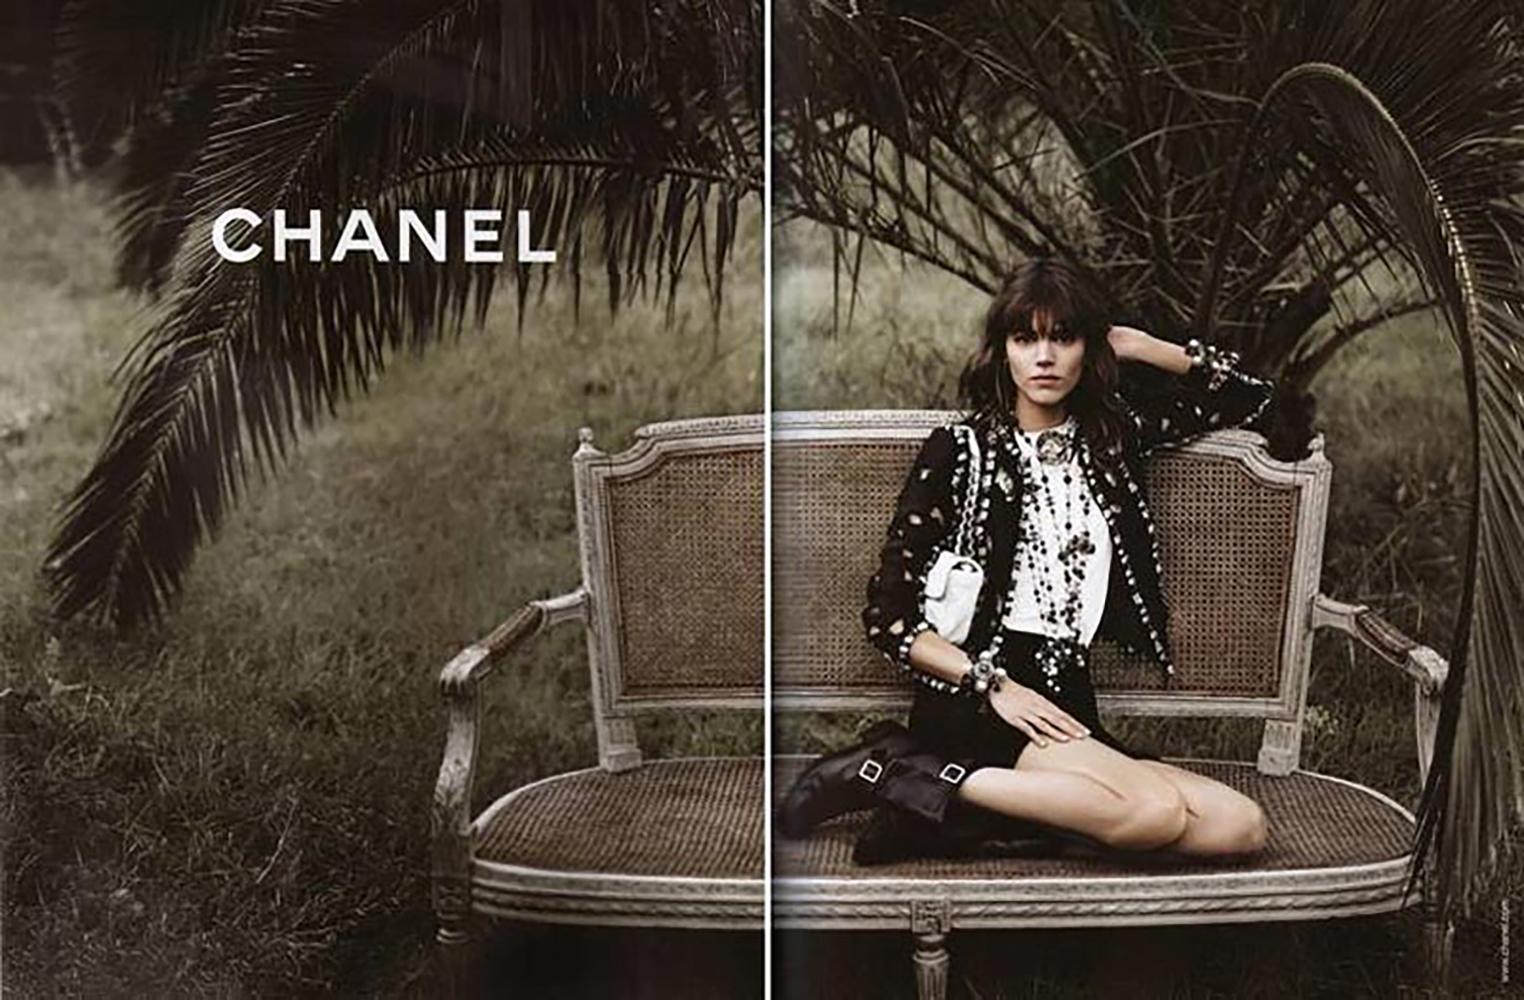 rare, collectors Chanel distressed tweed jacket from Runway of 2011 Spring Ready-to-Wear Collection by Mr Karl Lagerfeld.
As seen on many magazines cover, celebs. Retail price$ 8,800
Took part in famous Ad Campaign shot by genius Peter Lindberg. Had